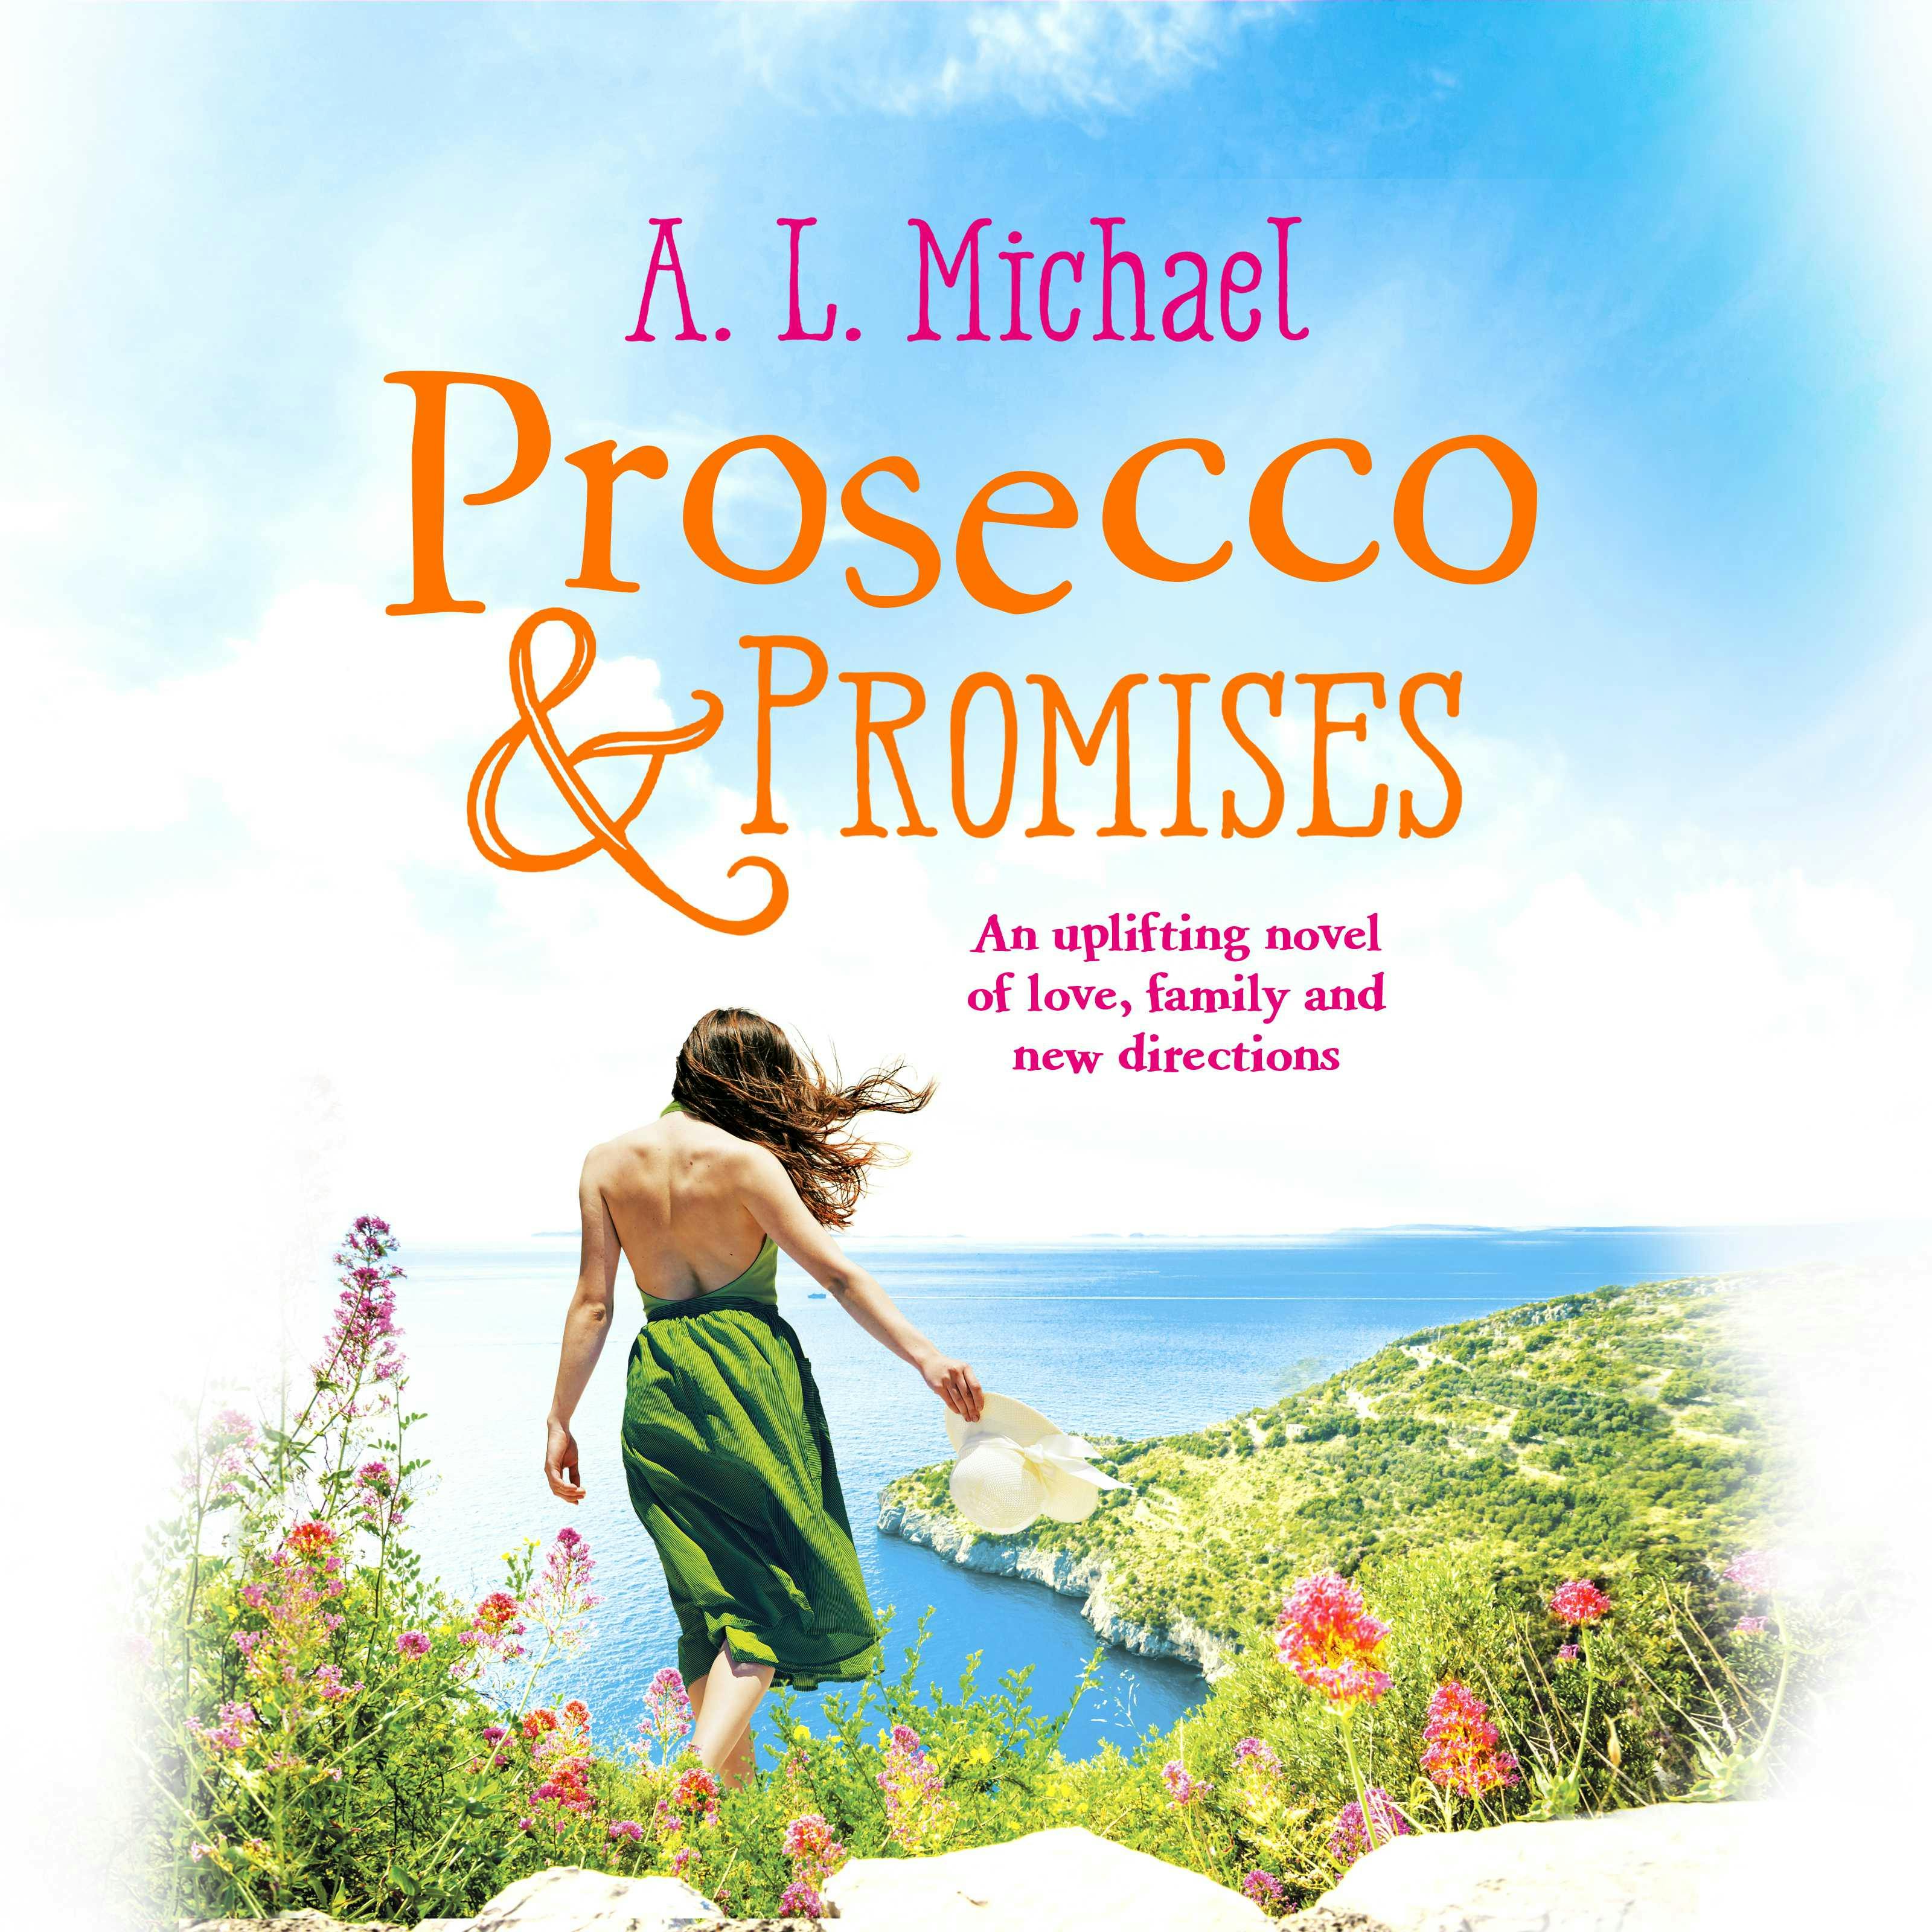 Prosecco and Promises: An uplifting novel of love, family and new directions - A. L. Michael